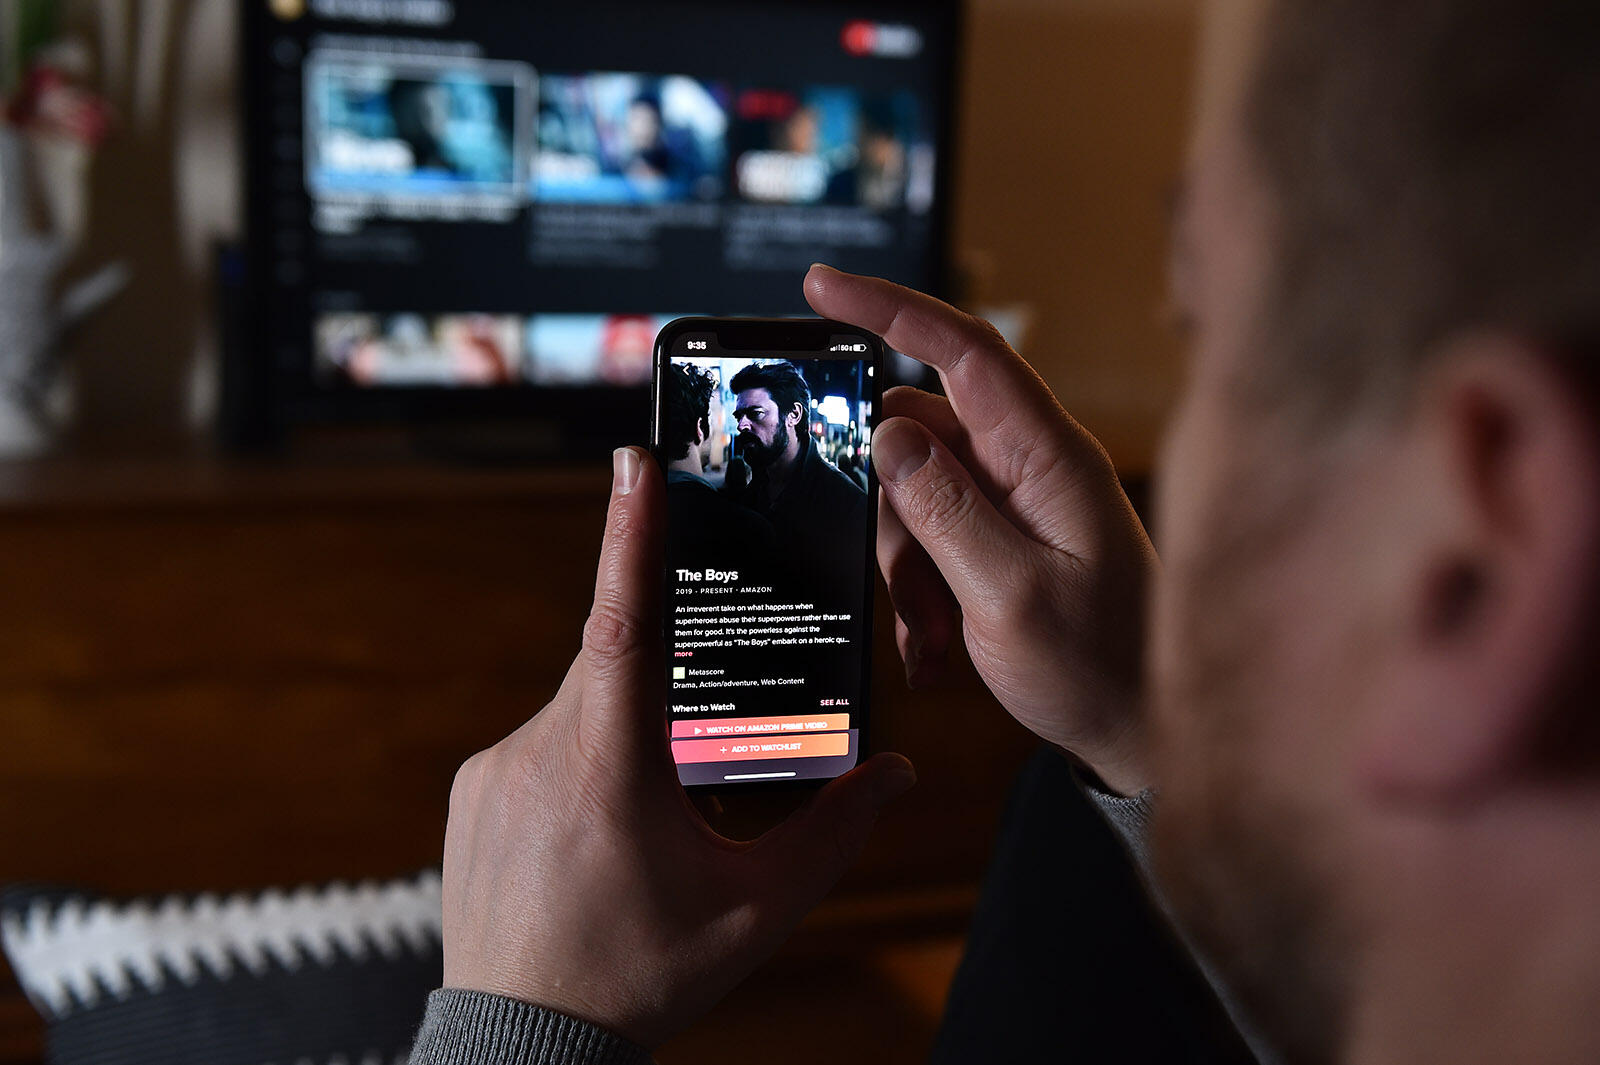 TV Guide App Gets a New Look with More Features for Cord Cutters